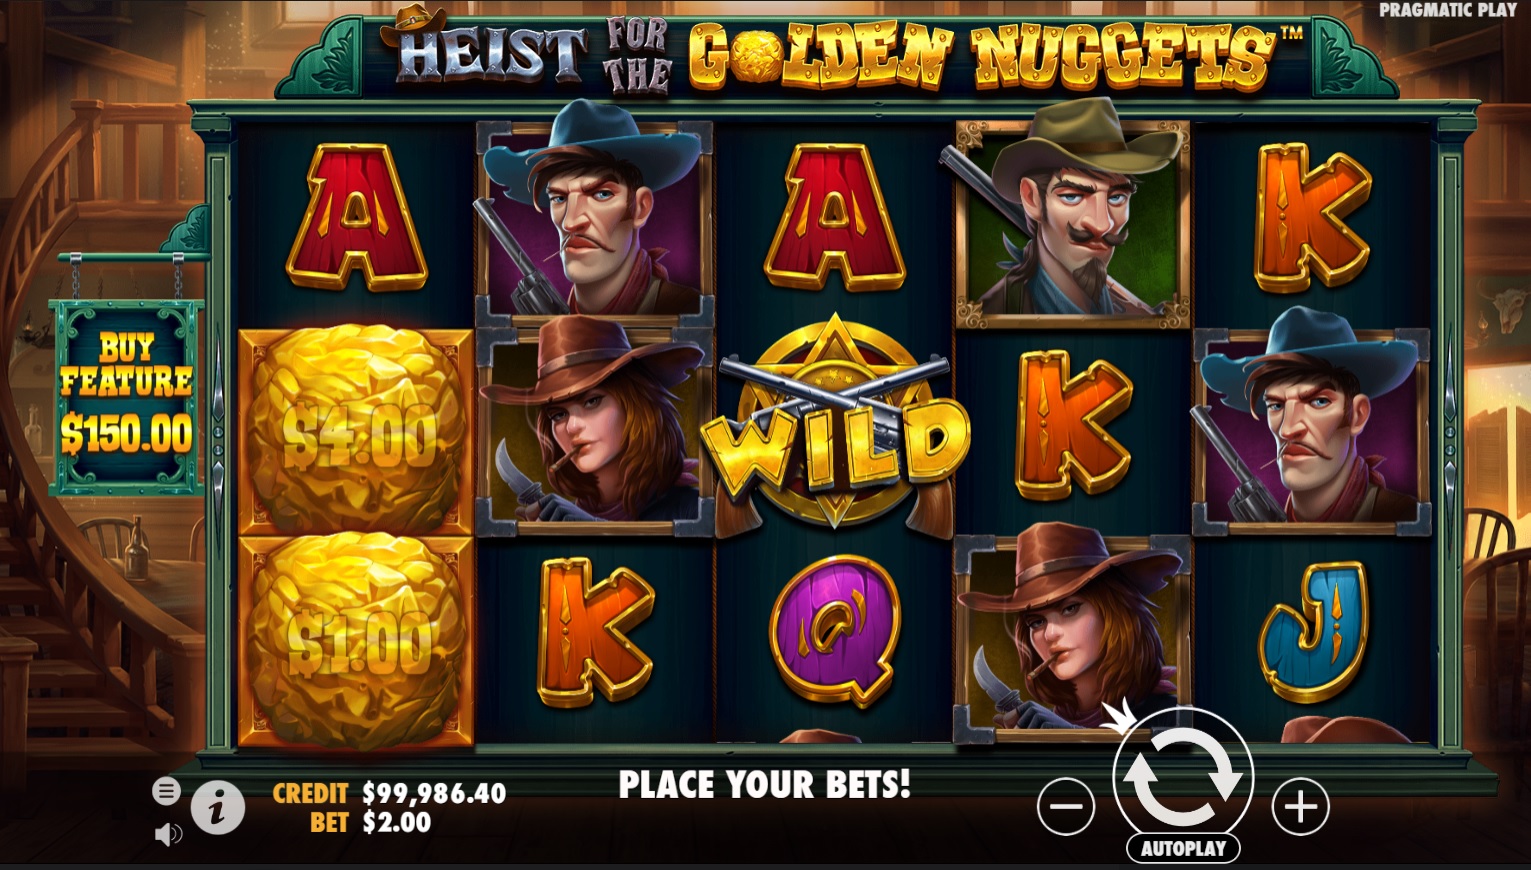 Heist for the Golden Nuggets, Base slot game